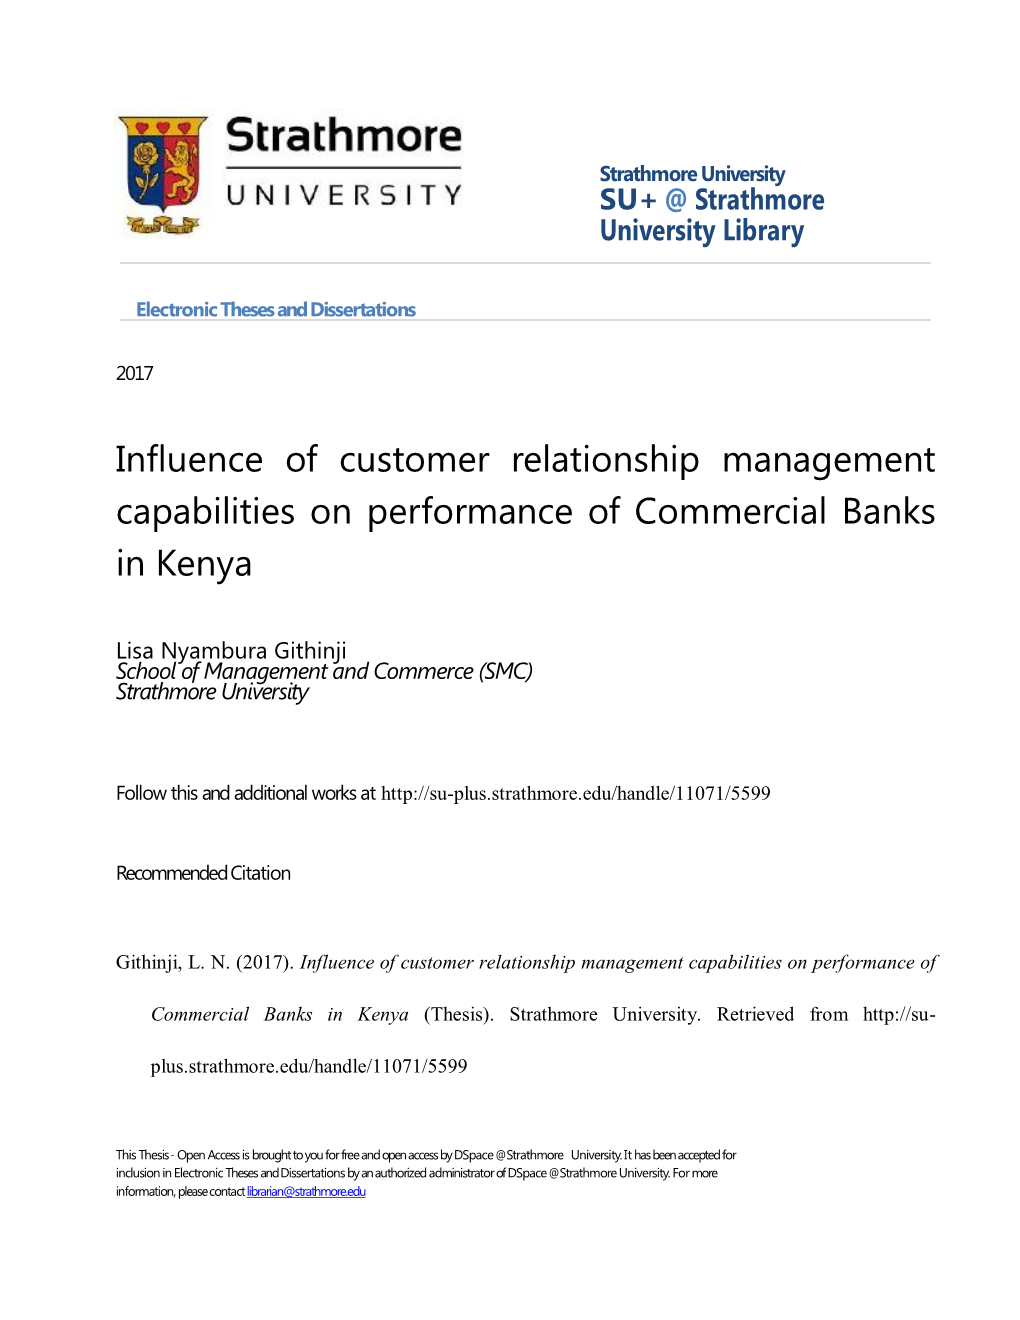 Influence of Customer Relationship Management Capabilities on Performance of Commercial Banks in Kenya